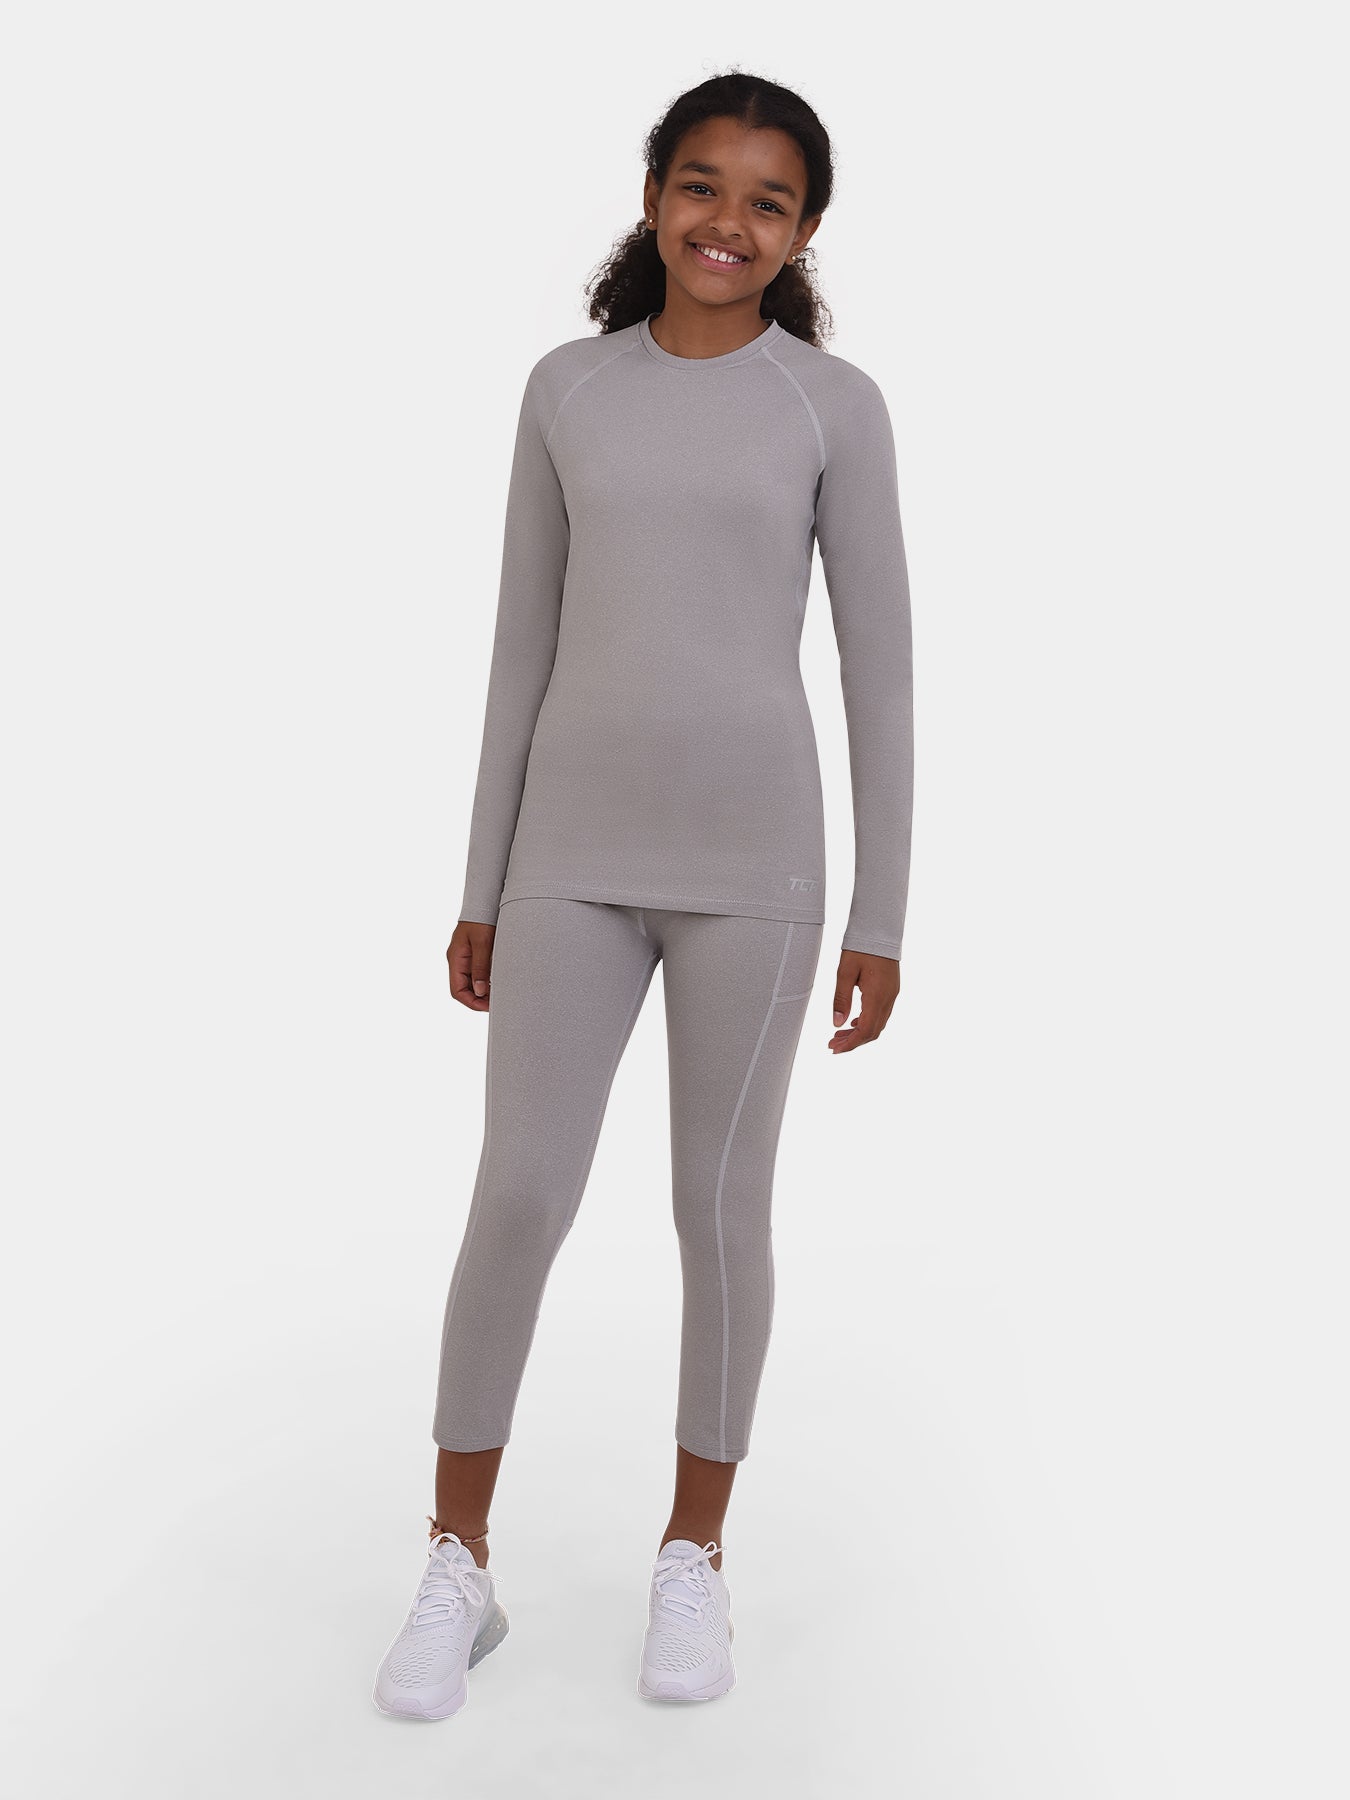 SuperThermal Long Sleeve Compression Base Layer Crew Neck Top for Girls With Brushed Inner Fabric